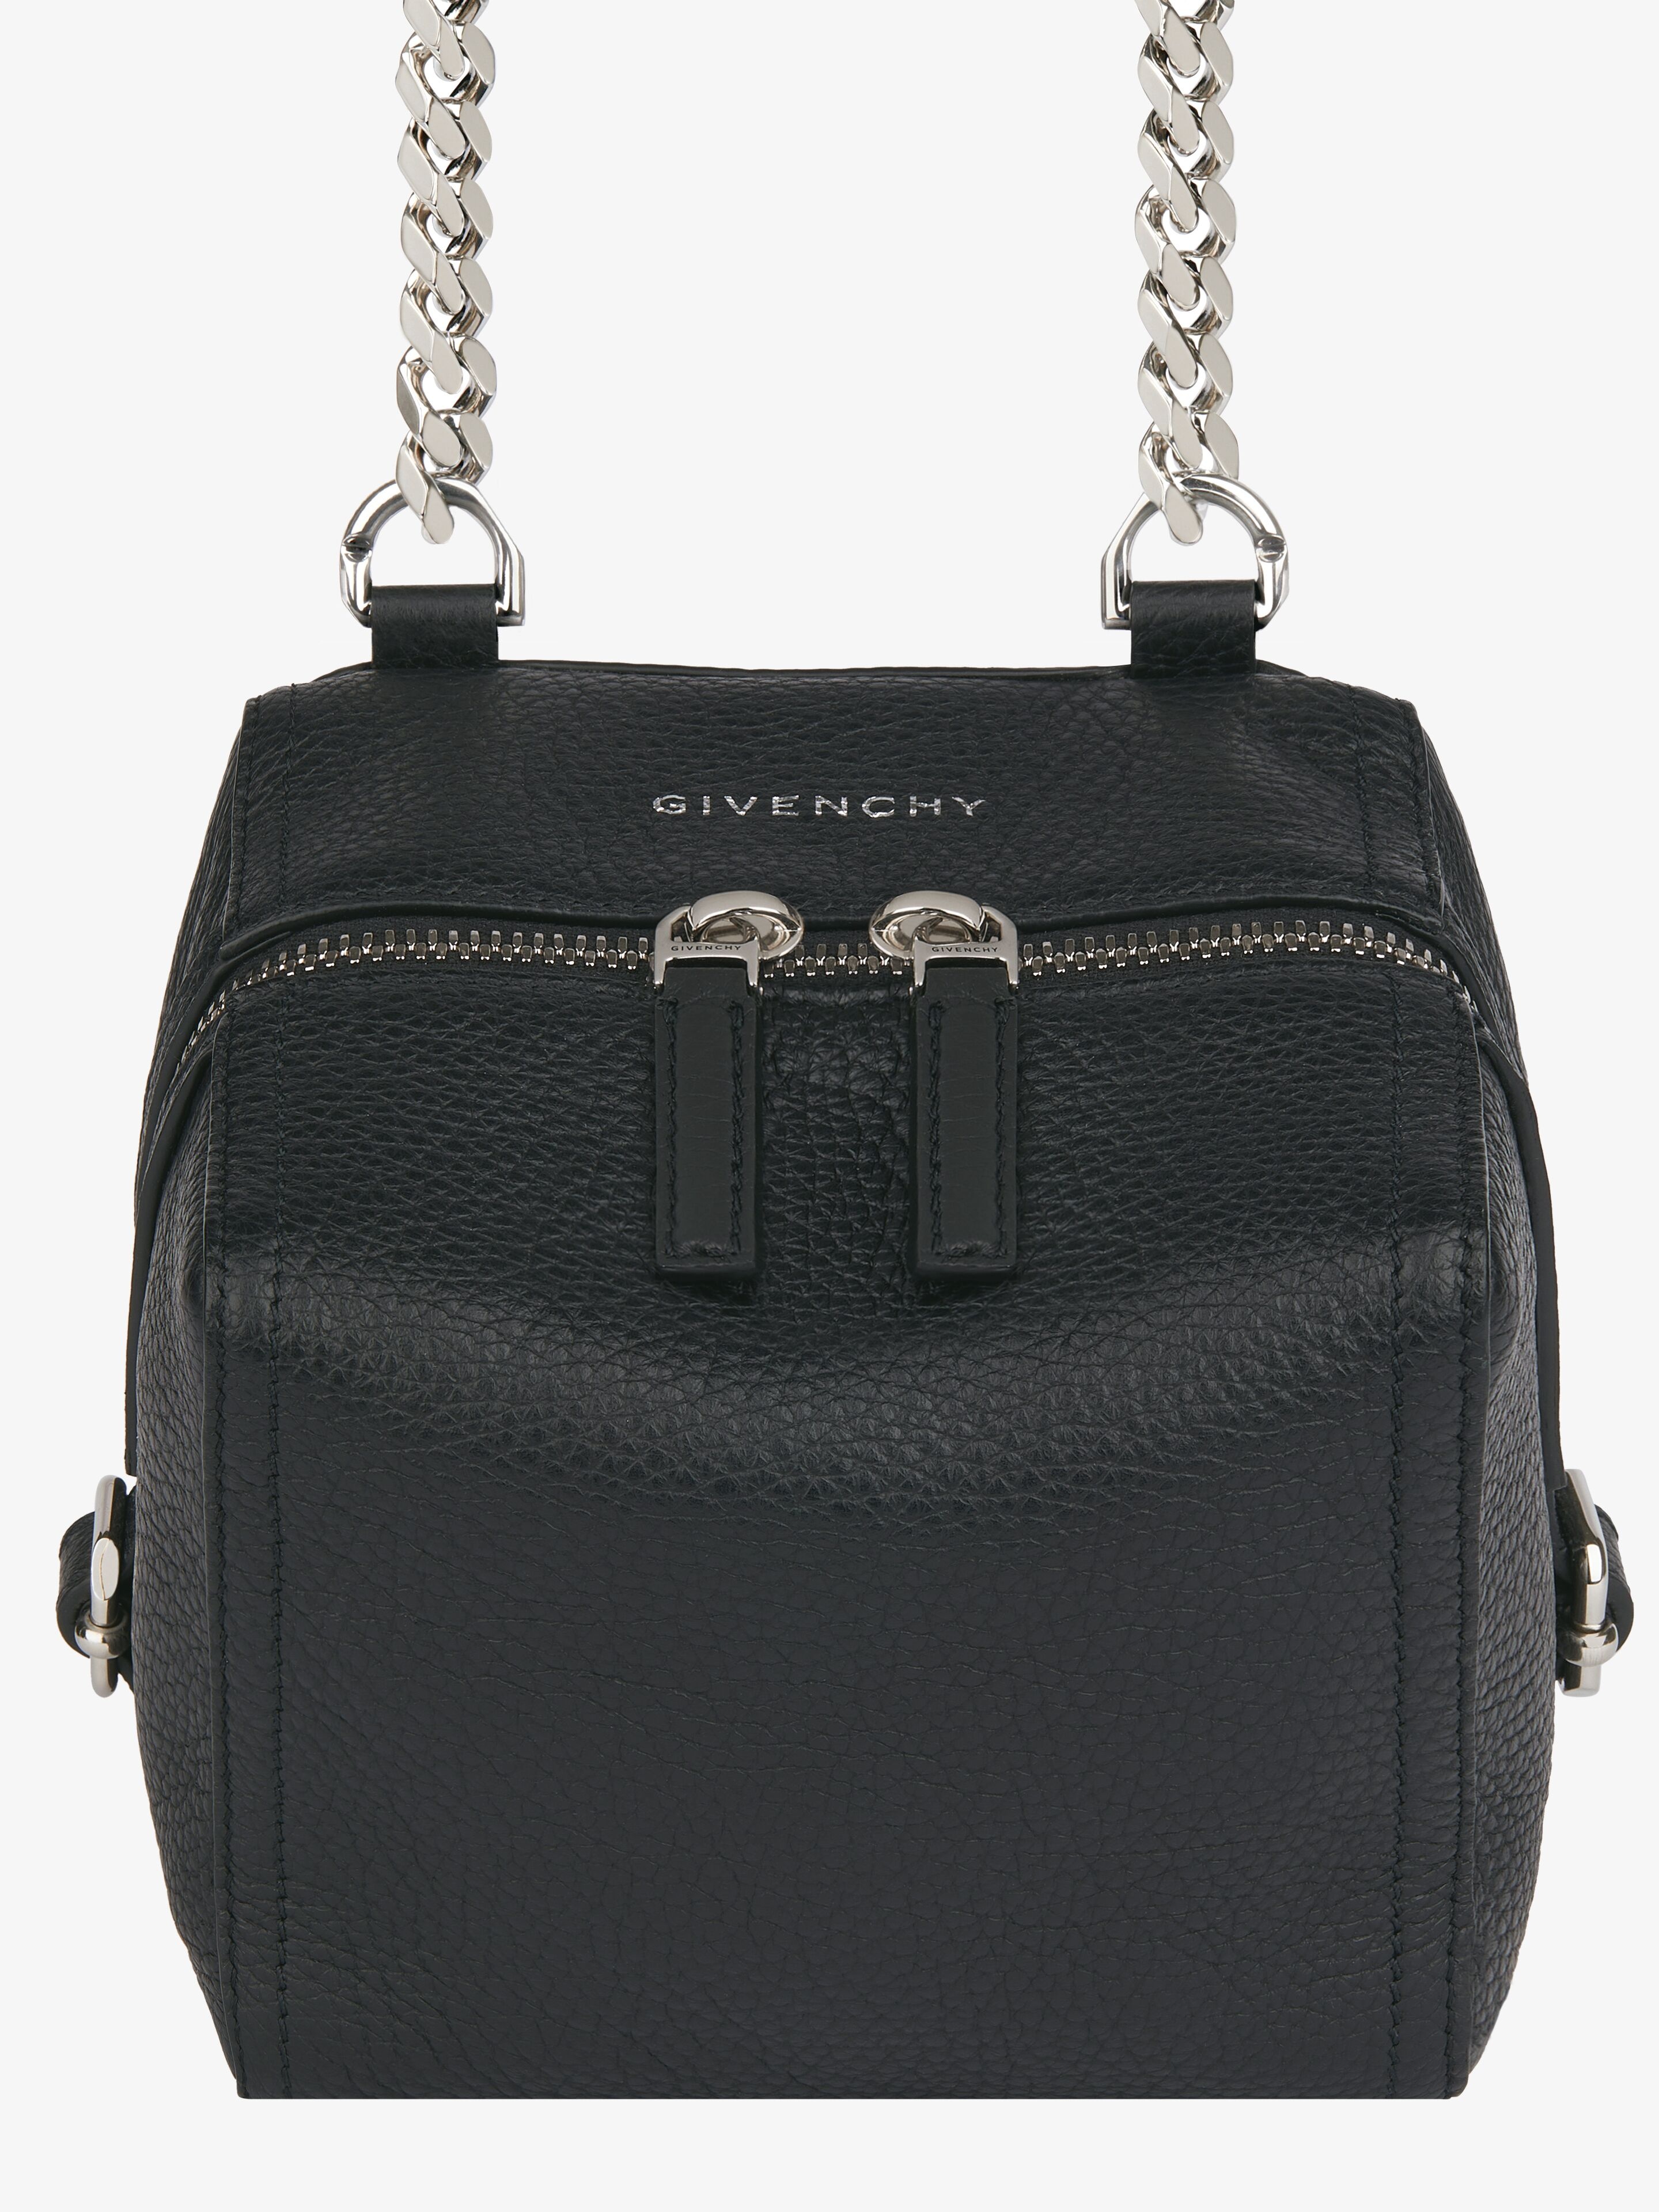 MINI PANDORA BAG IN GRAINED LEATHER WITH CHAIN - 6